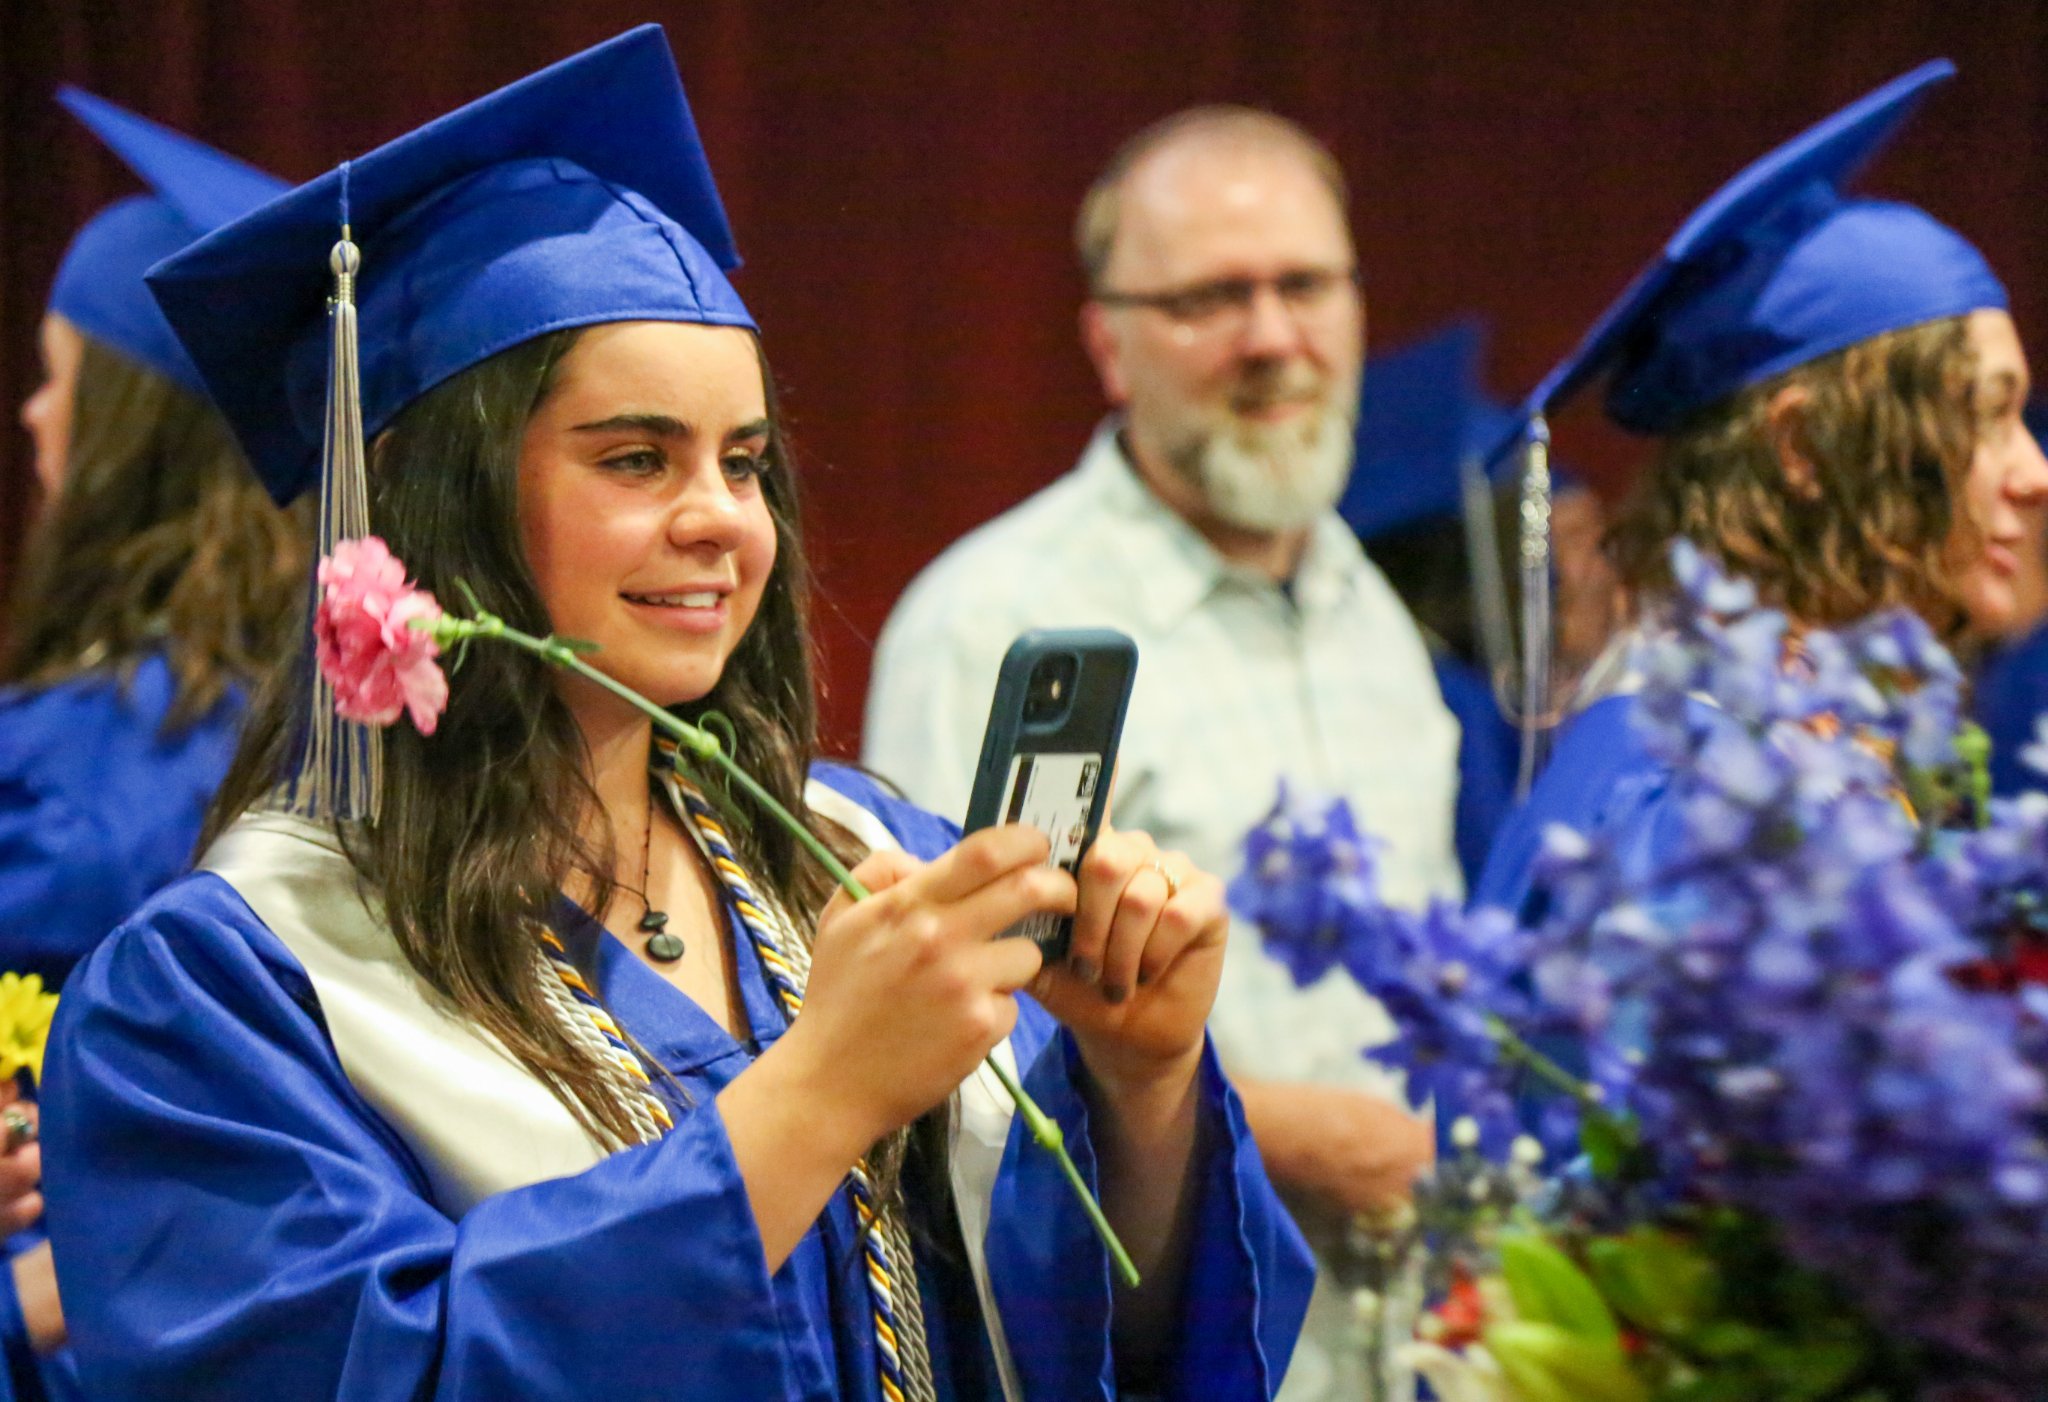 A PHS IB graduate takes photos during convocation.